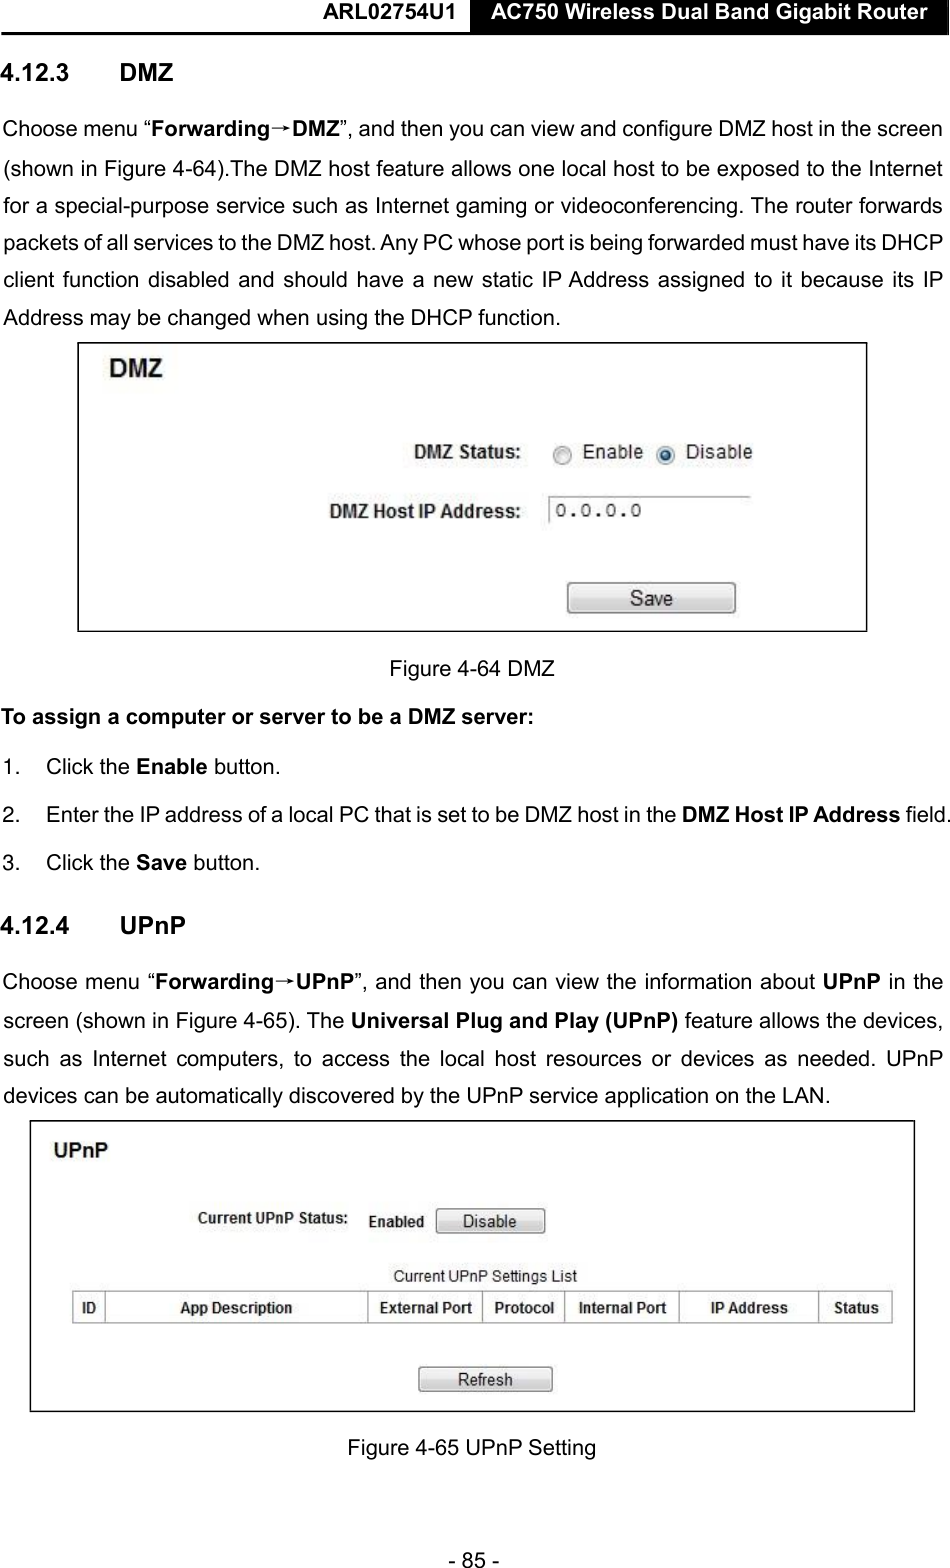  ARL02754U1  AC750 Wireless Dual Band Gigabit Router    - 85 -  4.12.3  DMZ  Choose menu “Forwarding→DMZ”, and then you can view and configure DMZ host in the screen (shown in Figure 4-64).The DMZ host feature allows one local host to be exposed to the Internet for a special-purpose service such as Internet gaming or videoconferencing. The router forwards packets of all services to the DMZ host. Any PC whose port is being forwarded must have its DHCP client function disabled and should have a new static IP Address assigned to it because its IP Address may be changed when using the DHCP function.   Figure 4-64 DMZ  To assign a computer or server to be a DMZ server:   1. Click the Enable button.   2. Enter the IP address of a local PC that is set to be DMZ host in the DMZ Host IP Address field.   3. Click the Save button.   4.12.4  UPnP  Choose menu “Forwarding→UPnP”, and then you can view the information about UPnP in the screen (shown in Figure 4-65). The Universal Plug and Play (UPnP) feature allows the devices, such  as  Internet  computers,  to  access  the  local  host  resources  or  devices  as  needed.  UPnP devices can be automatically discovered by the UPnP service application on the LAN.   Figure 4-65 UPnP Setting      